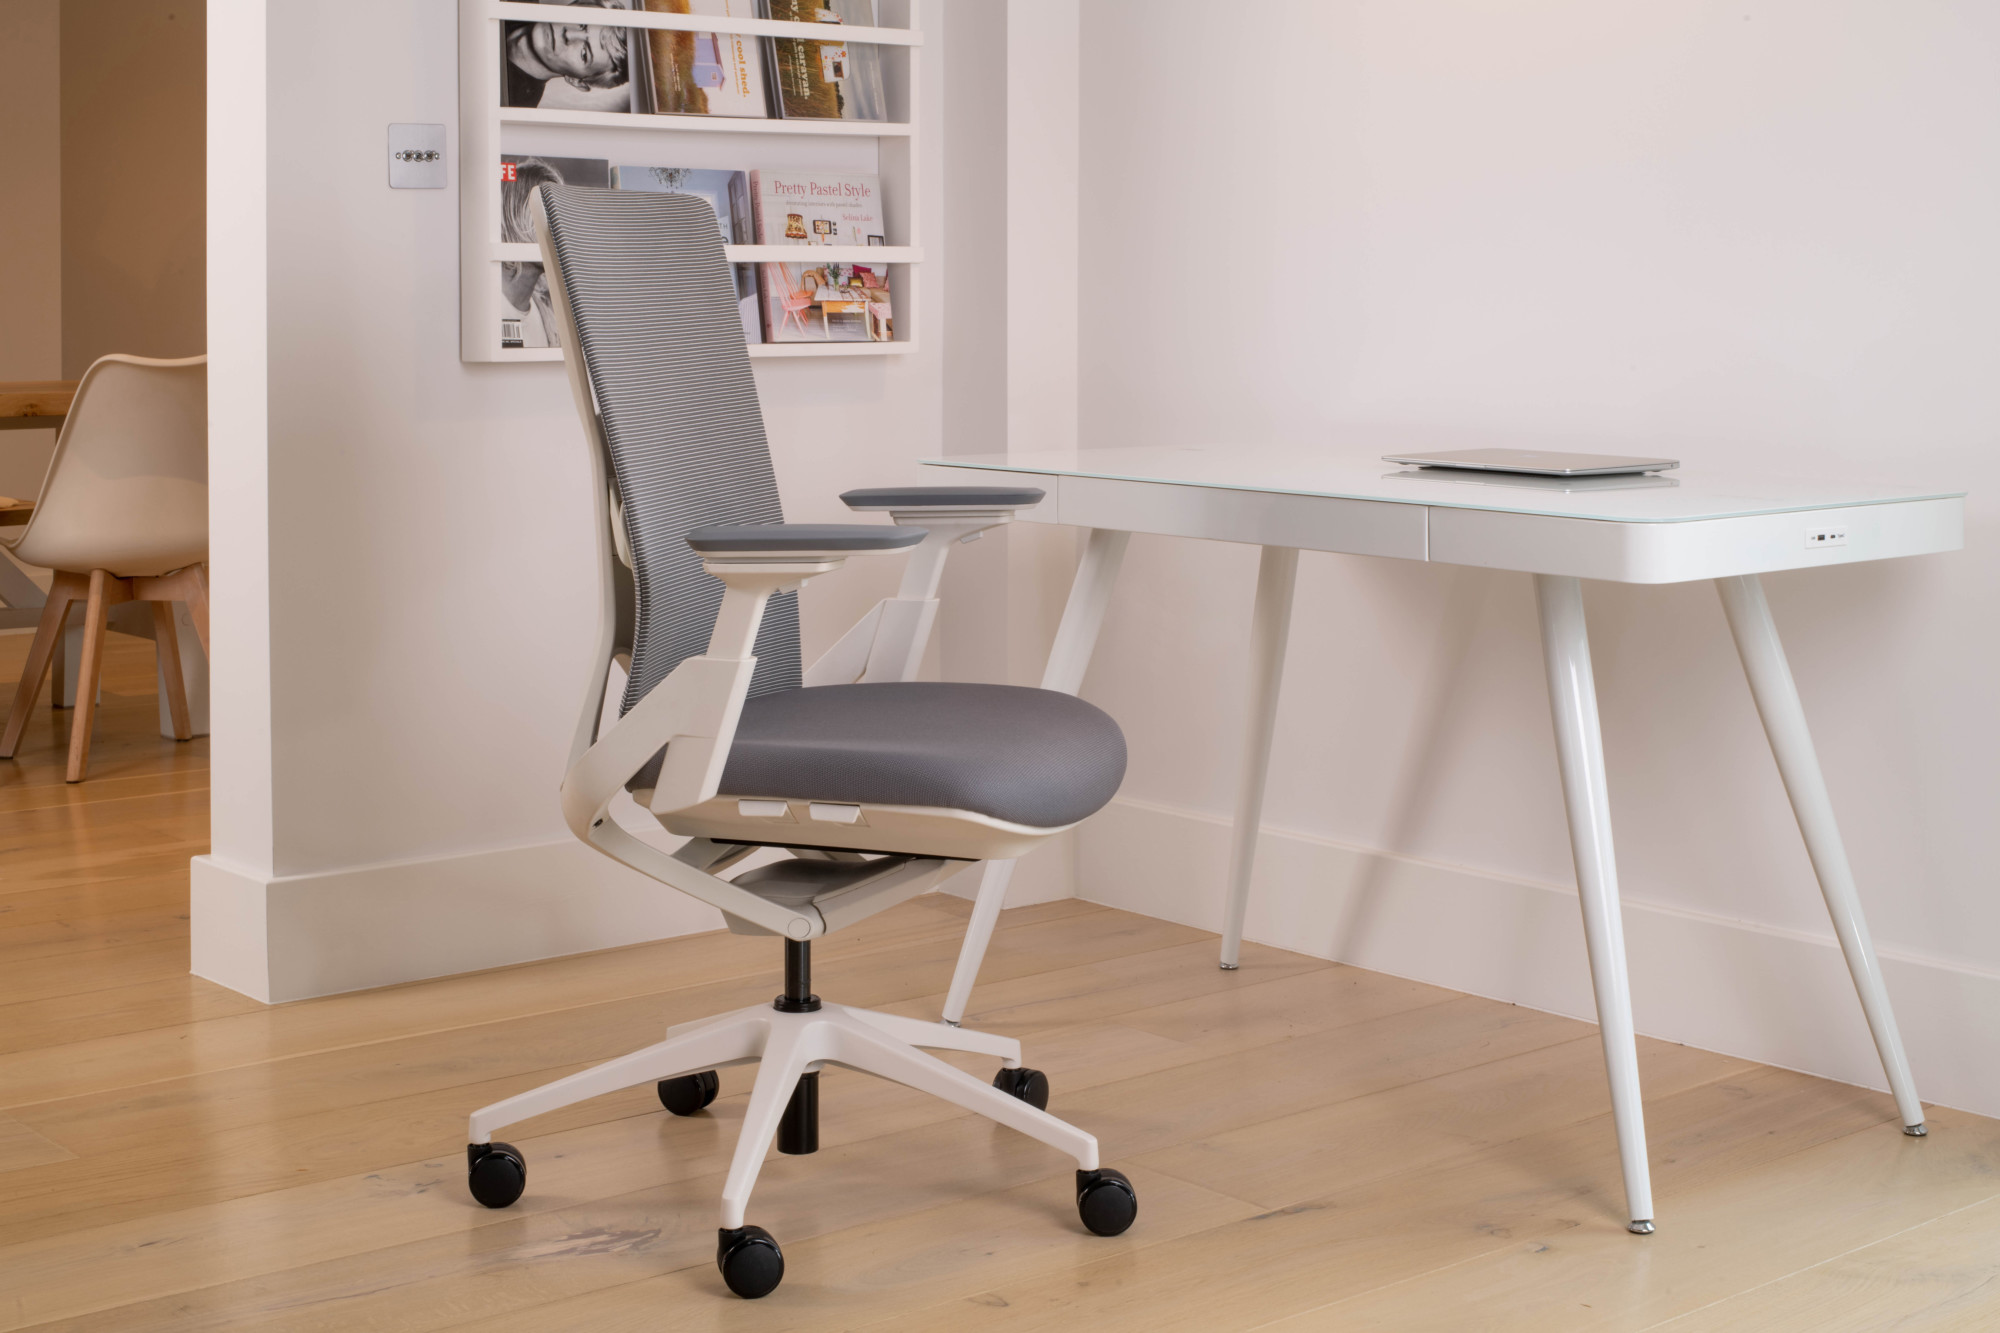 The Maja by Koble Designs is a stylish, high quality fully ergonomic home office desk chair.